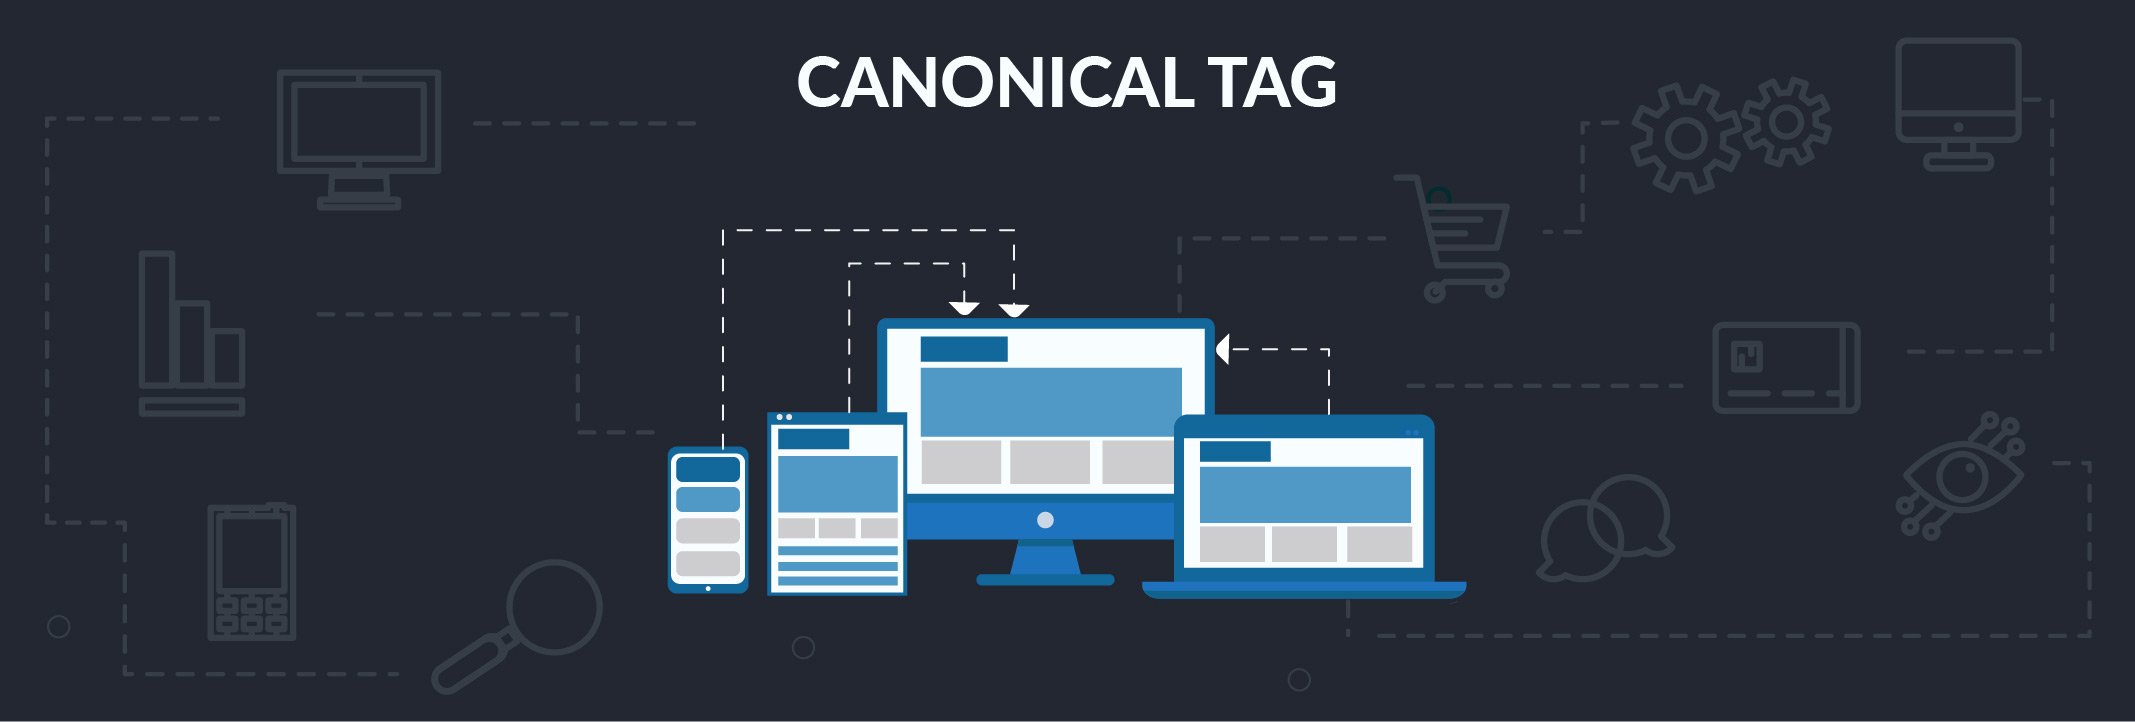 How Can Canonical Tag Help Your SEO?